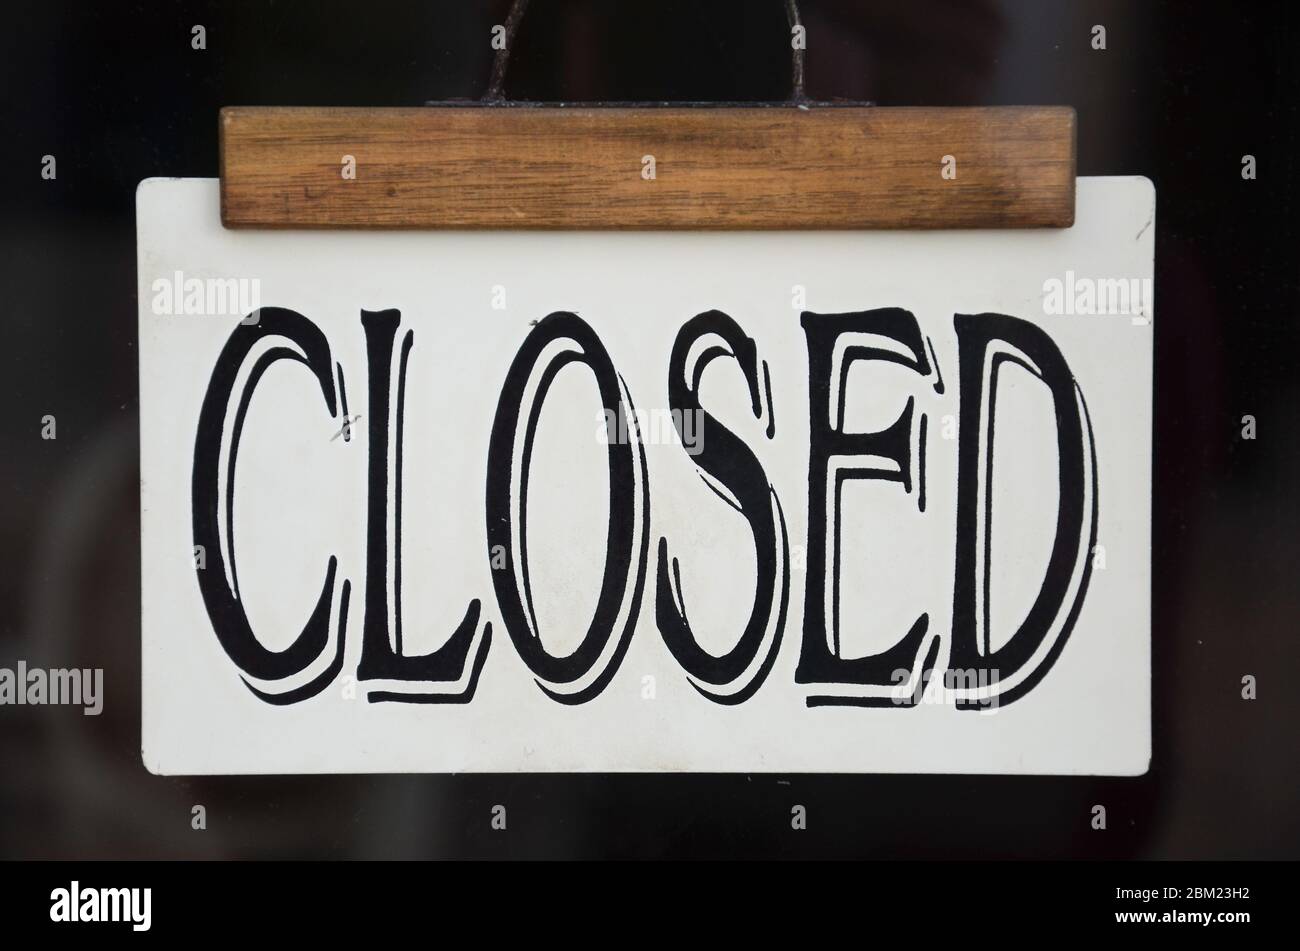 Sign Closed on the front window of a store. Black sign in Western-style font. Restaurants, bars and shops closed due to coronavirus, COVID-19 pandemic. Economical crisis, depression. Stock Photo